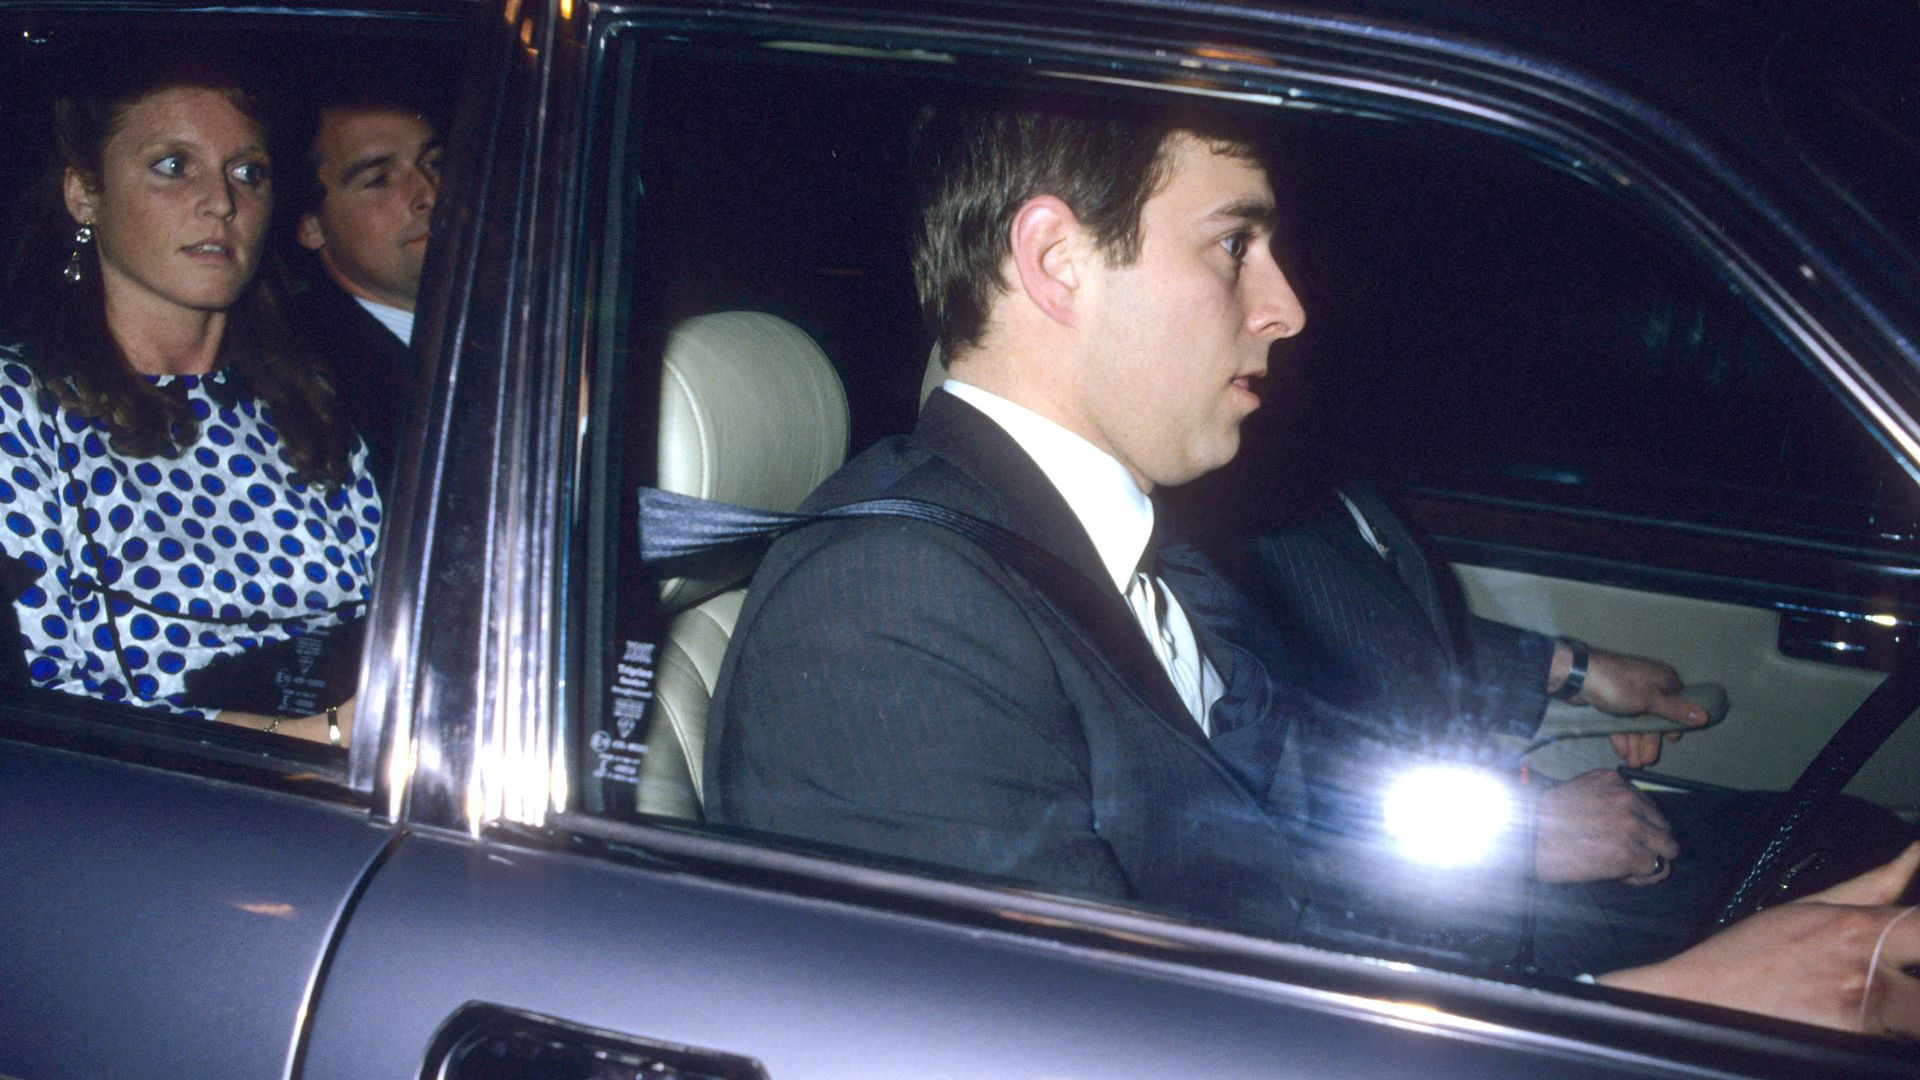 Prince Andrew driving a car with Sarah Ferguson in the back